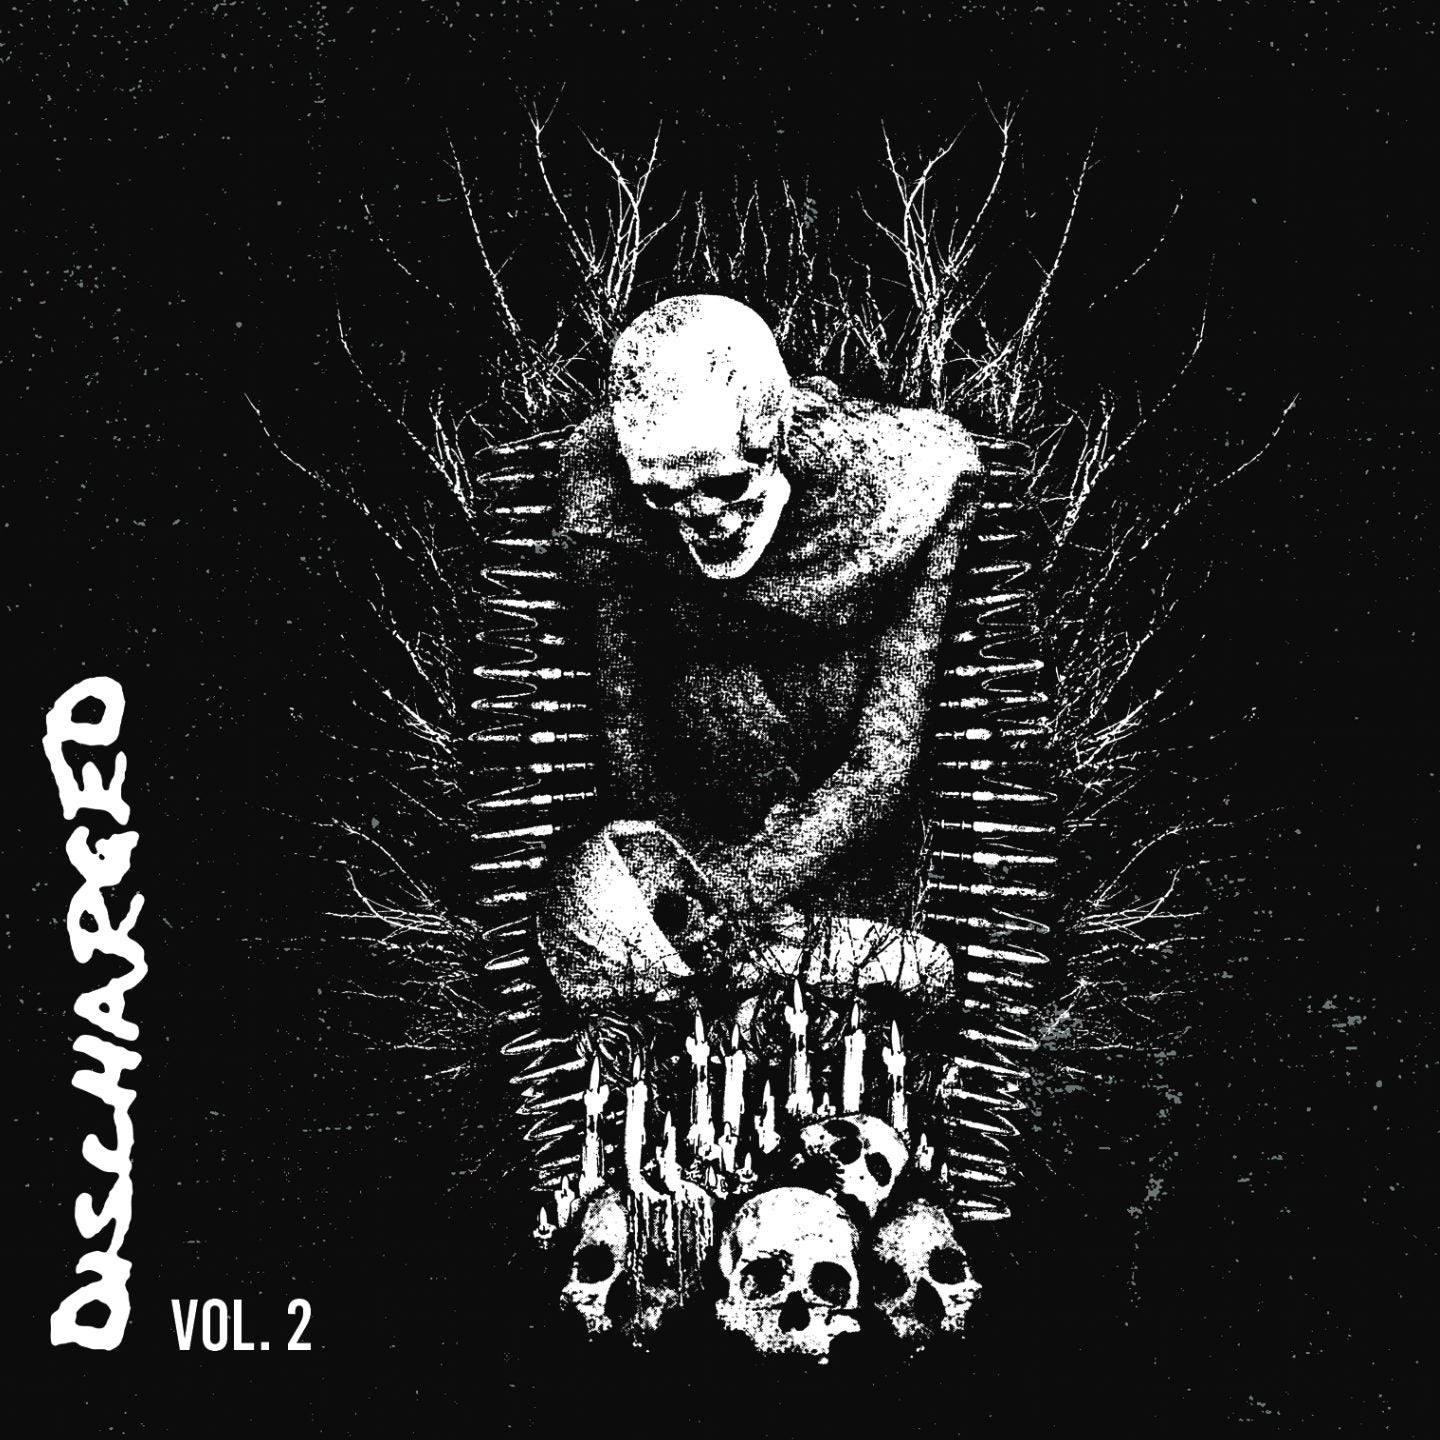 Discharged "Vol.2" - A tribute to Discharge compilation Digital album